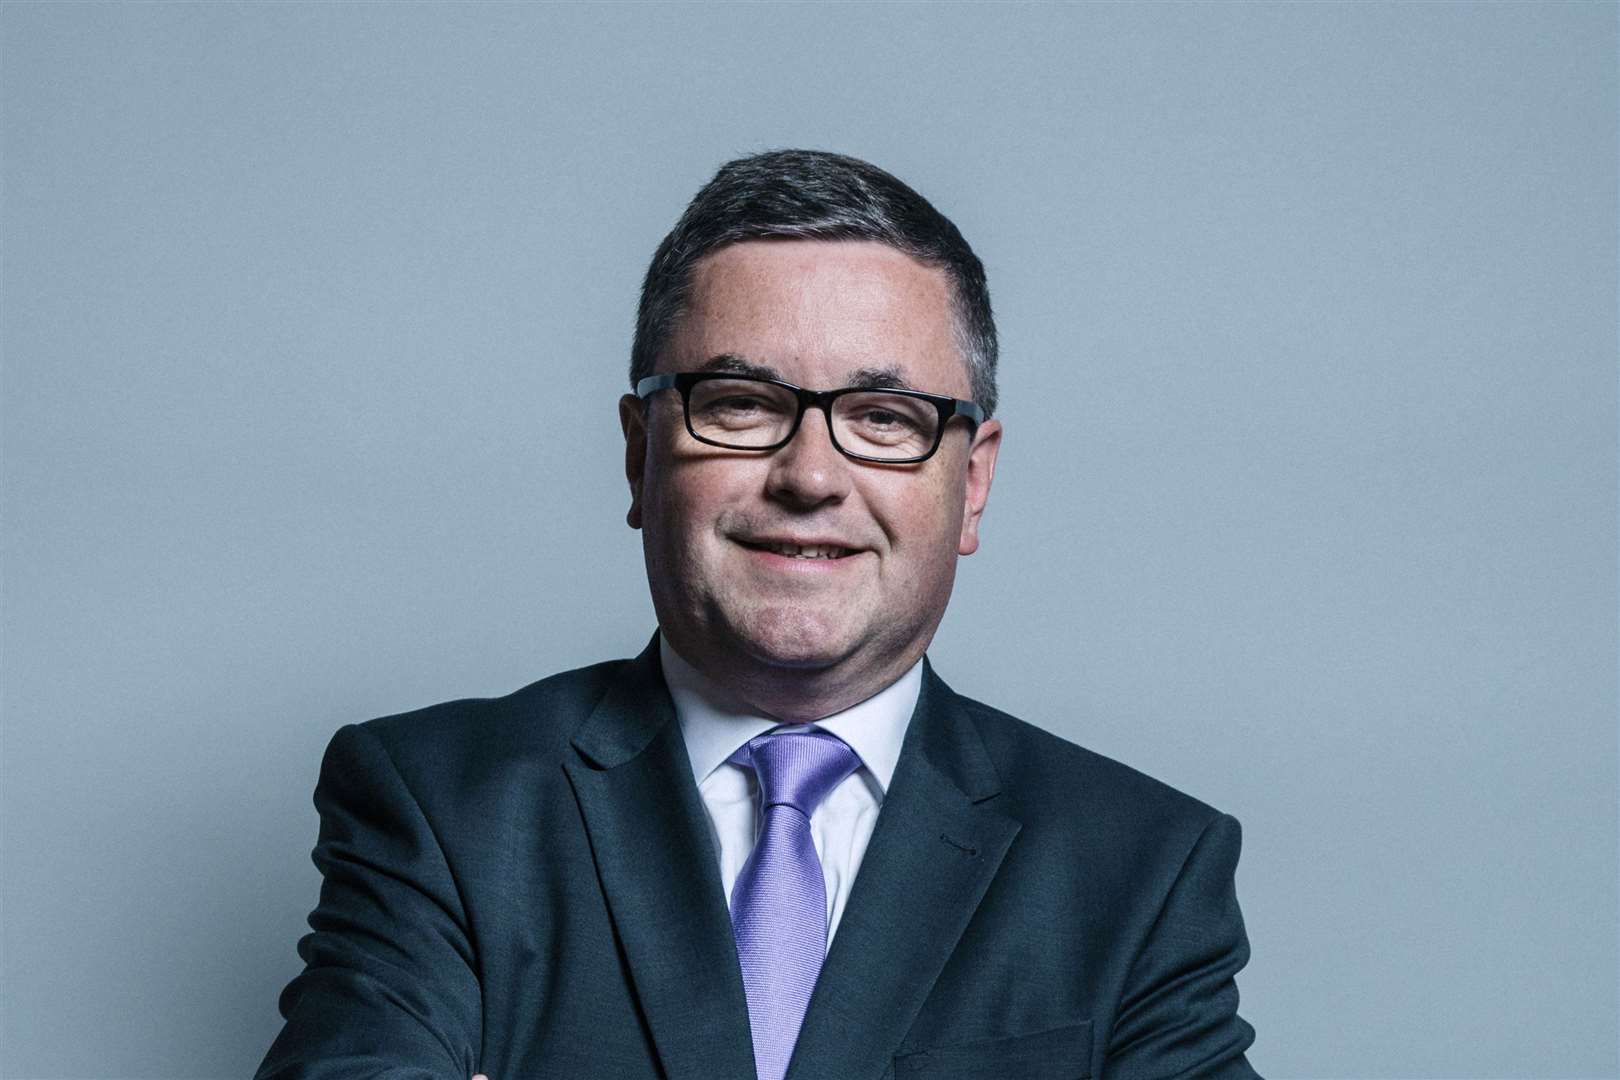 Then Justice Secretary Robert Buckland unified the Probation Service last summer